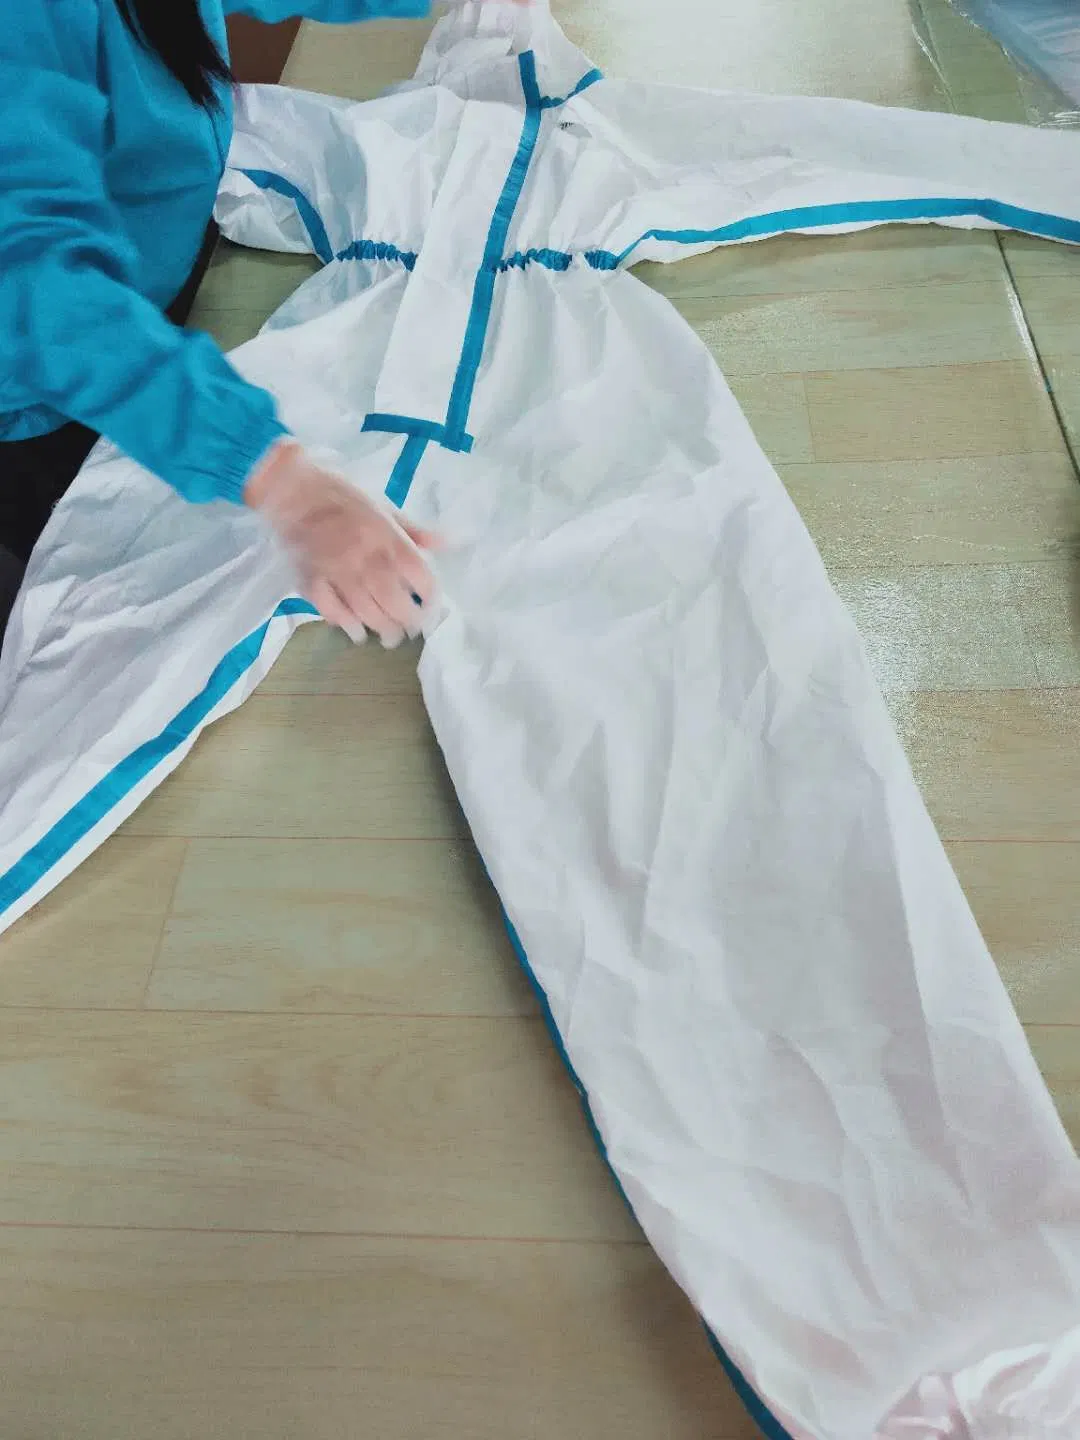 Disposable White Coverall Safety Uniform Isolation Gown Suit Full Body Protective Hooded Clothes Work Wear